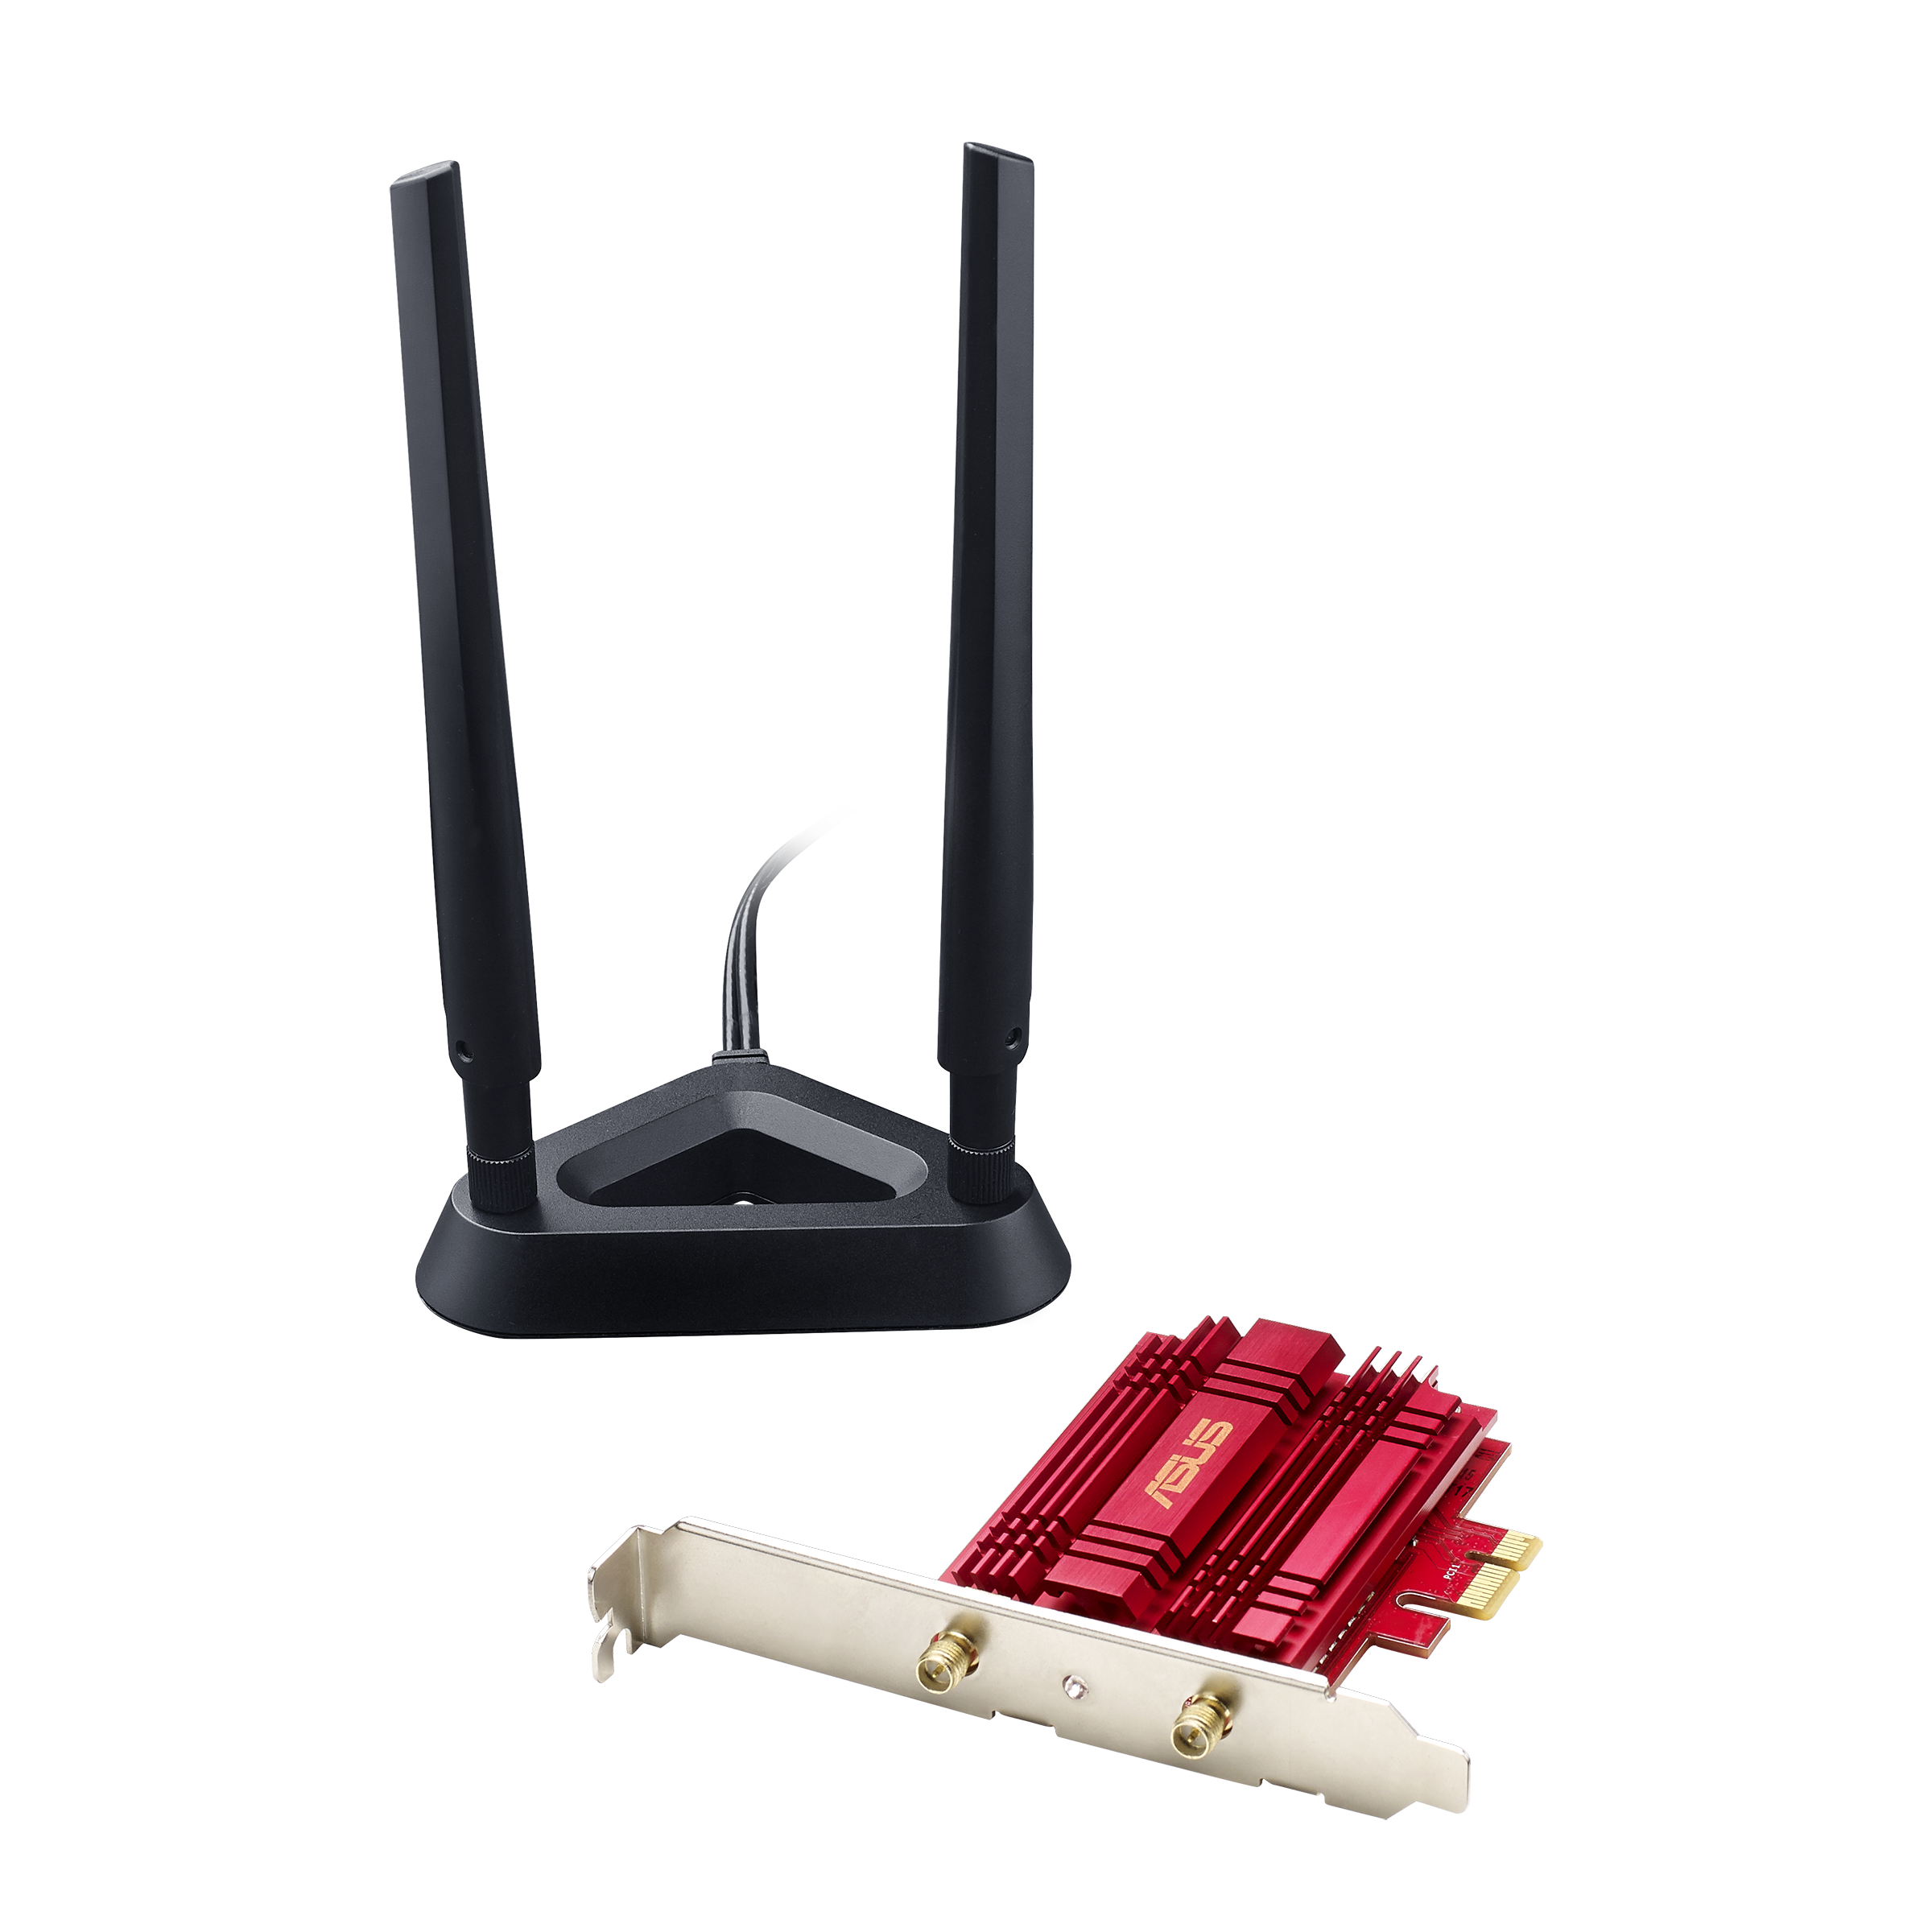 Scared to die Absay Newness PCE-AC56｜Wireless & Wired Adapters｜ASUS Hong Kong